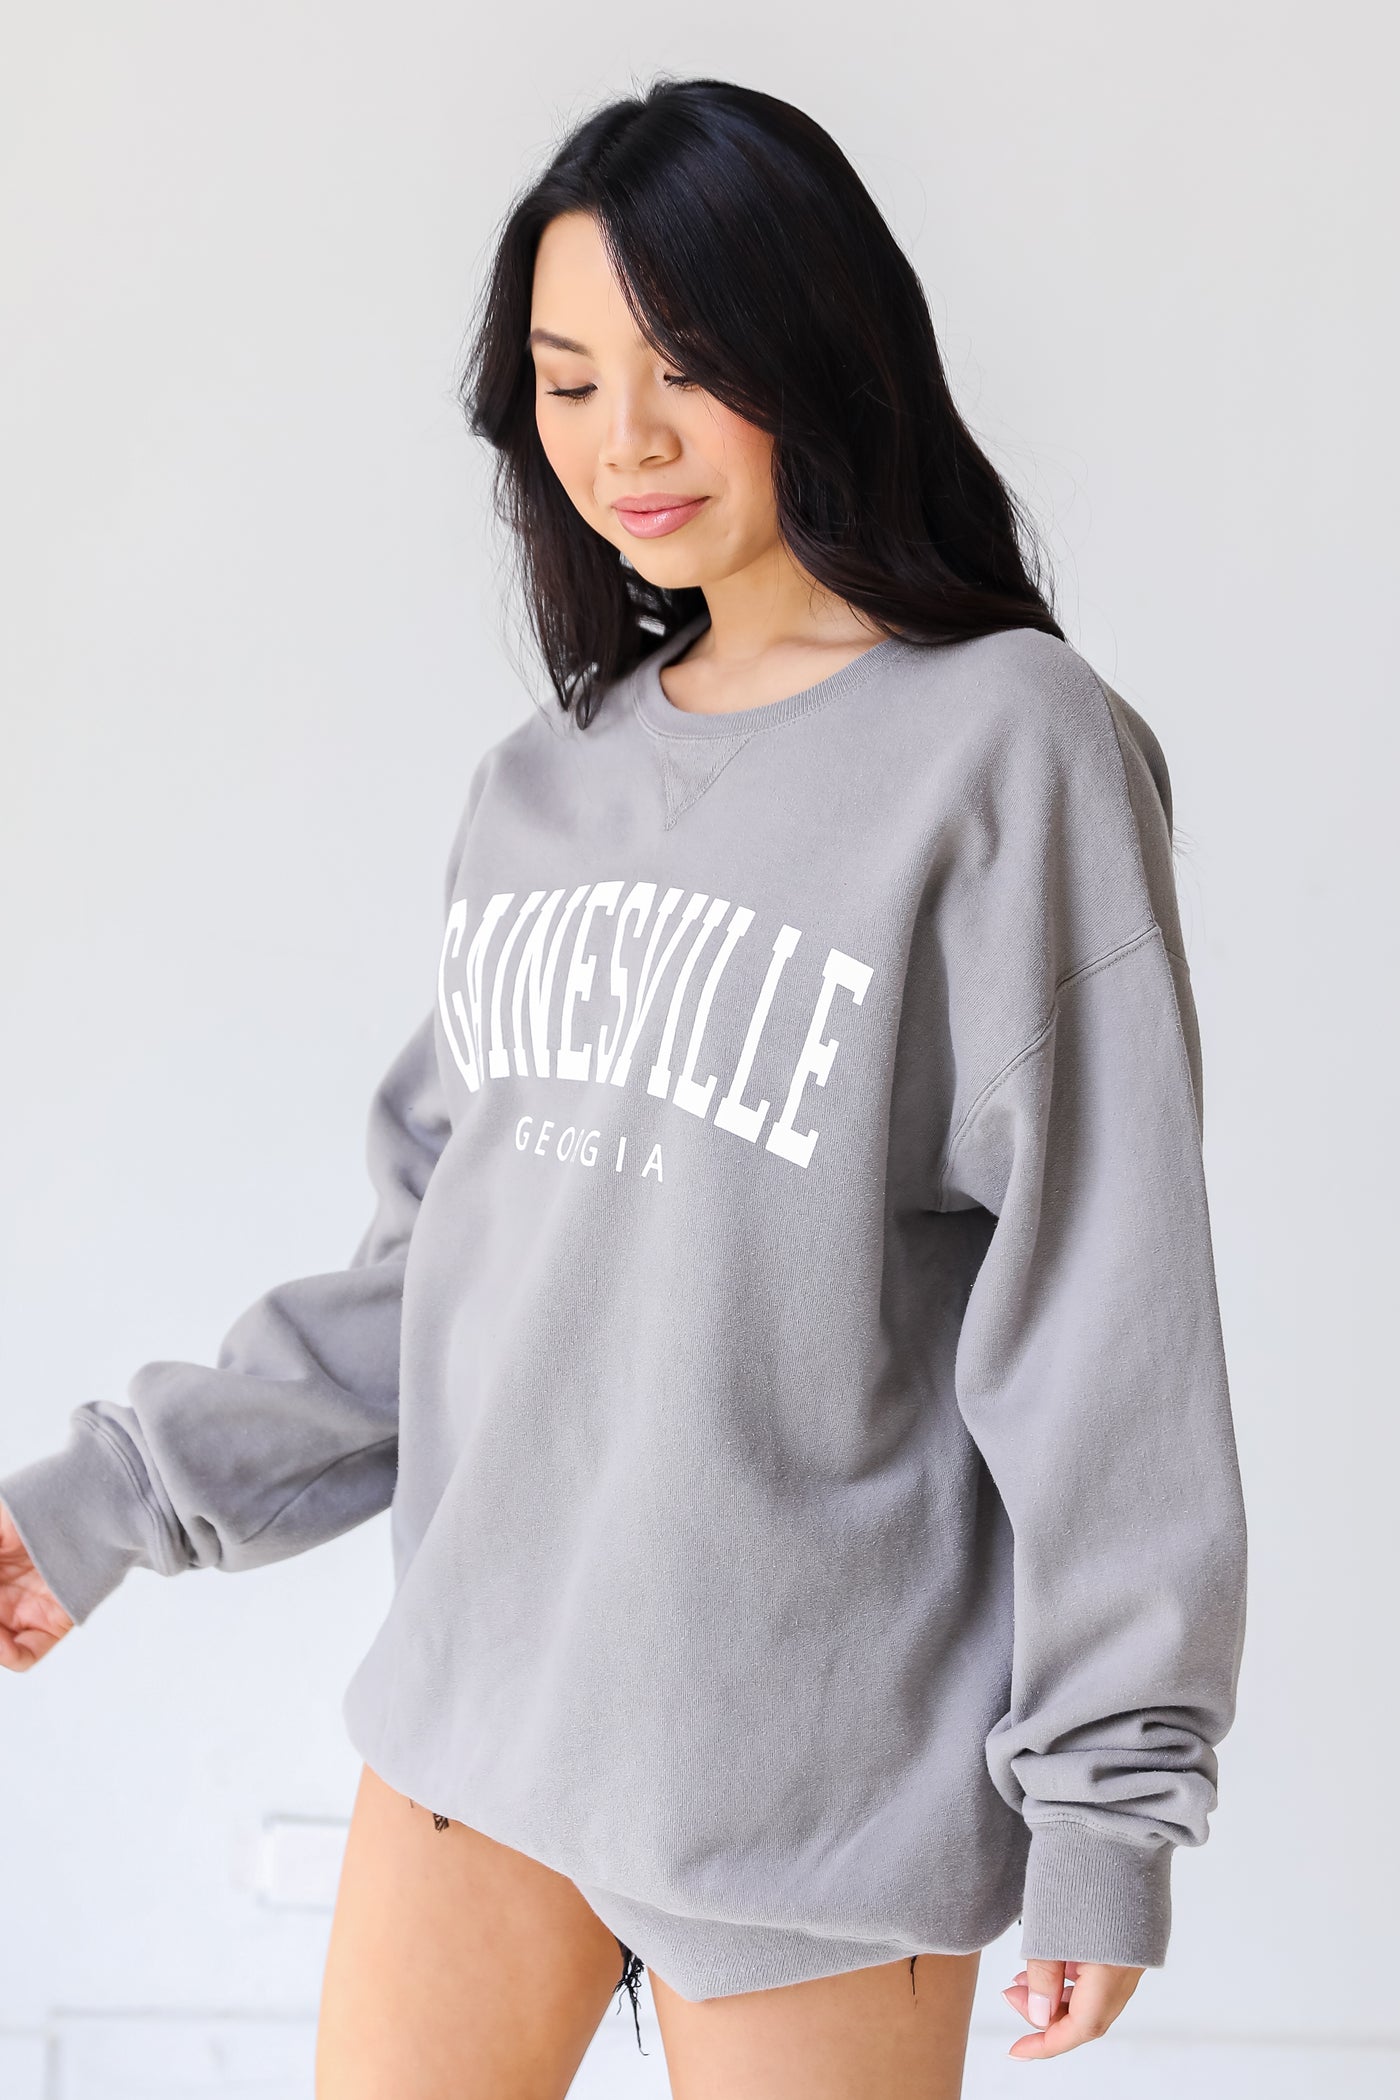 Grey Gainesville Georgia Pullover side view